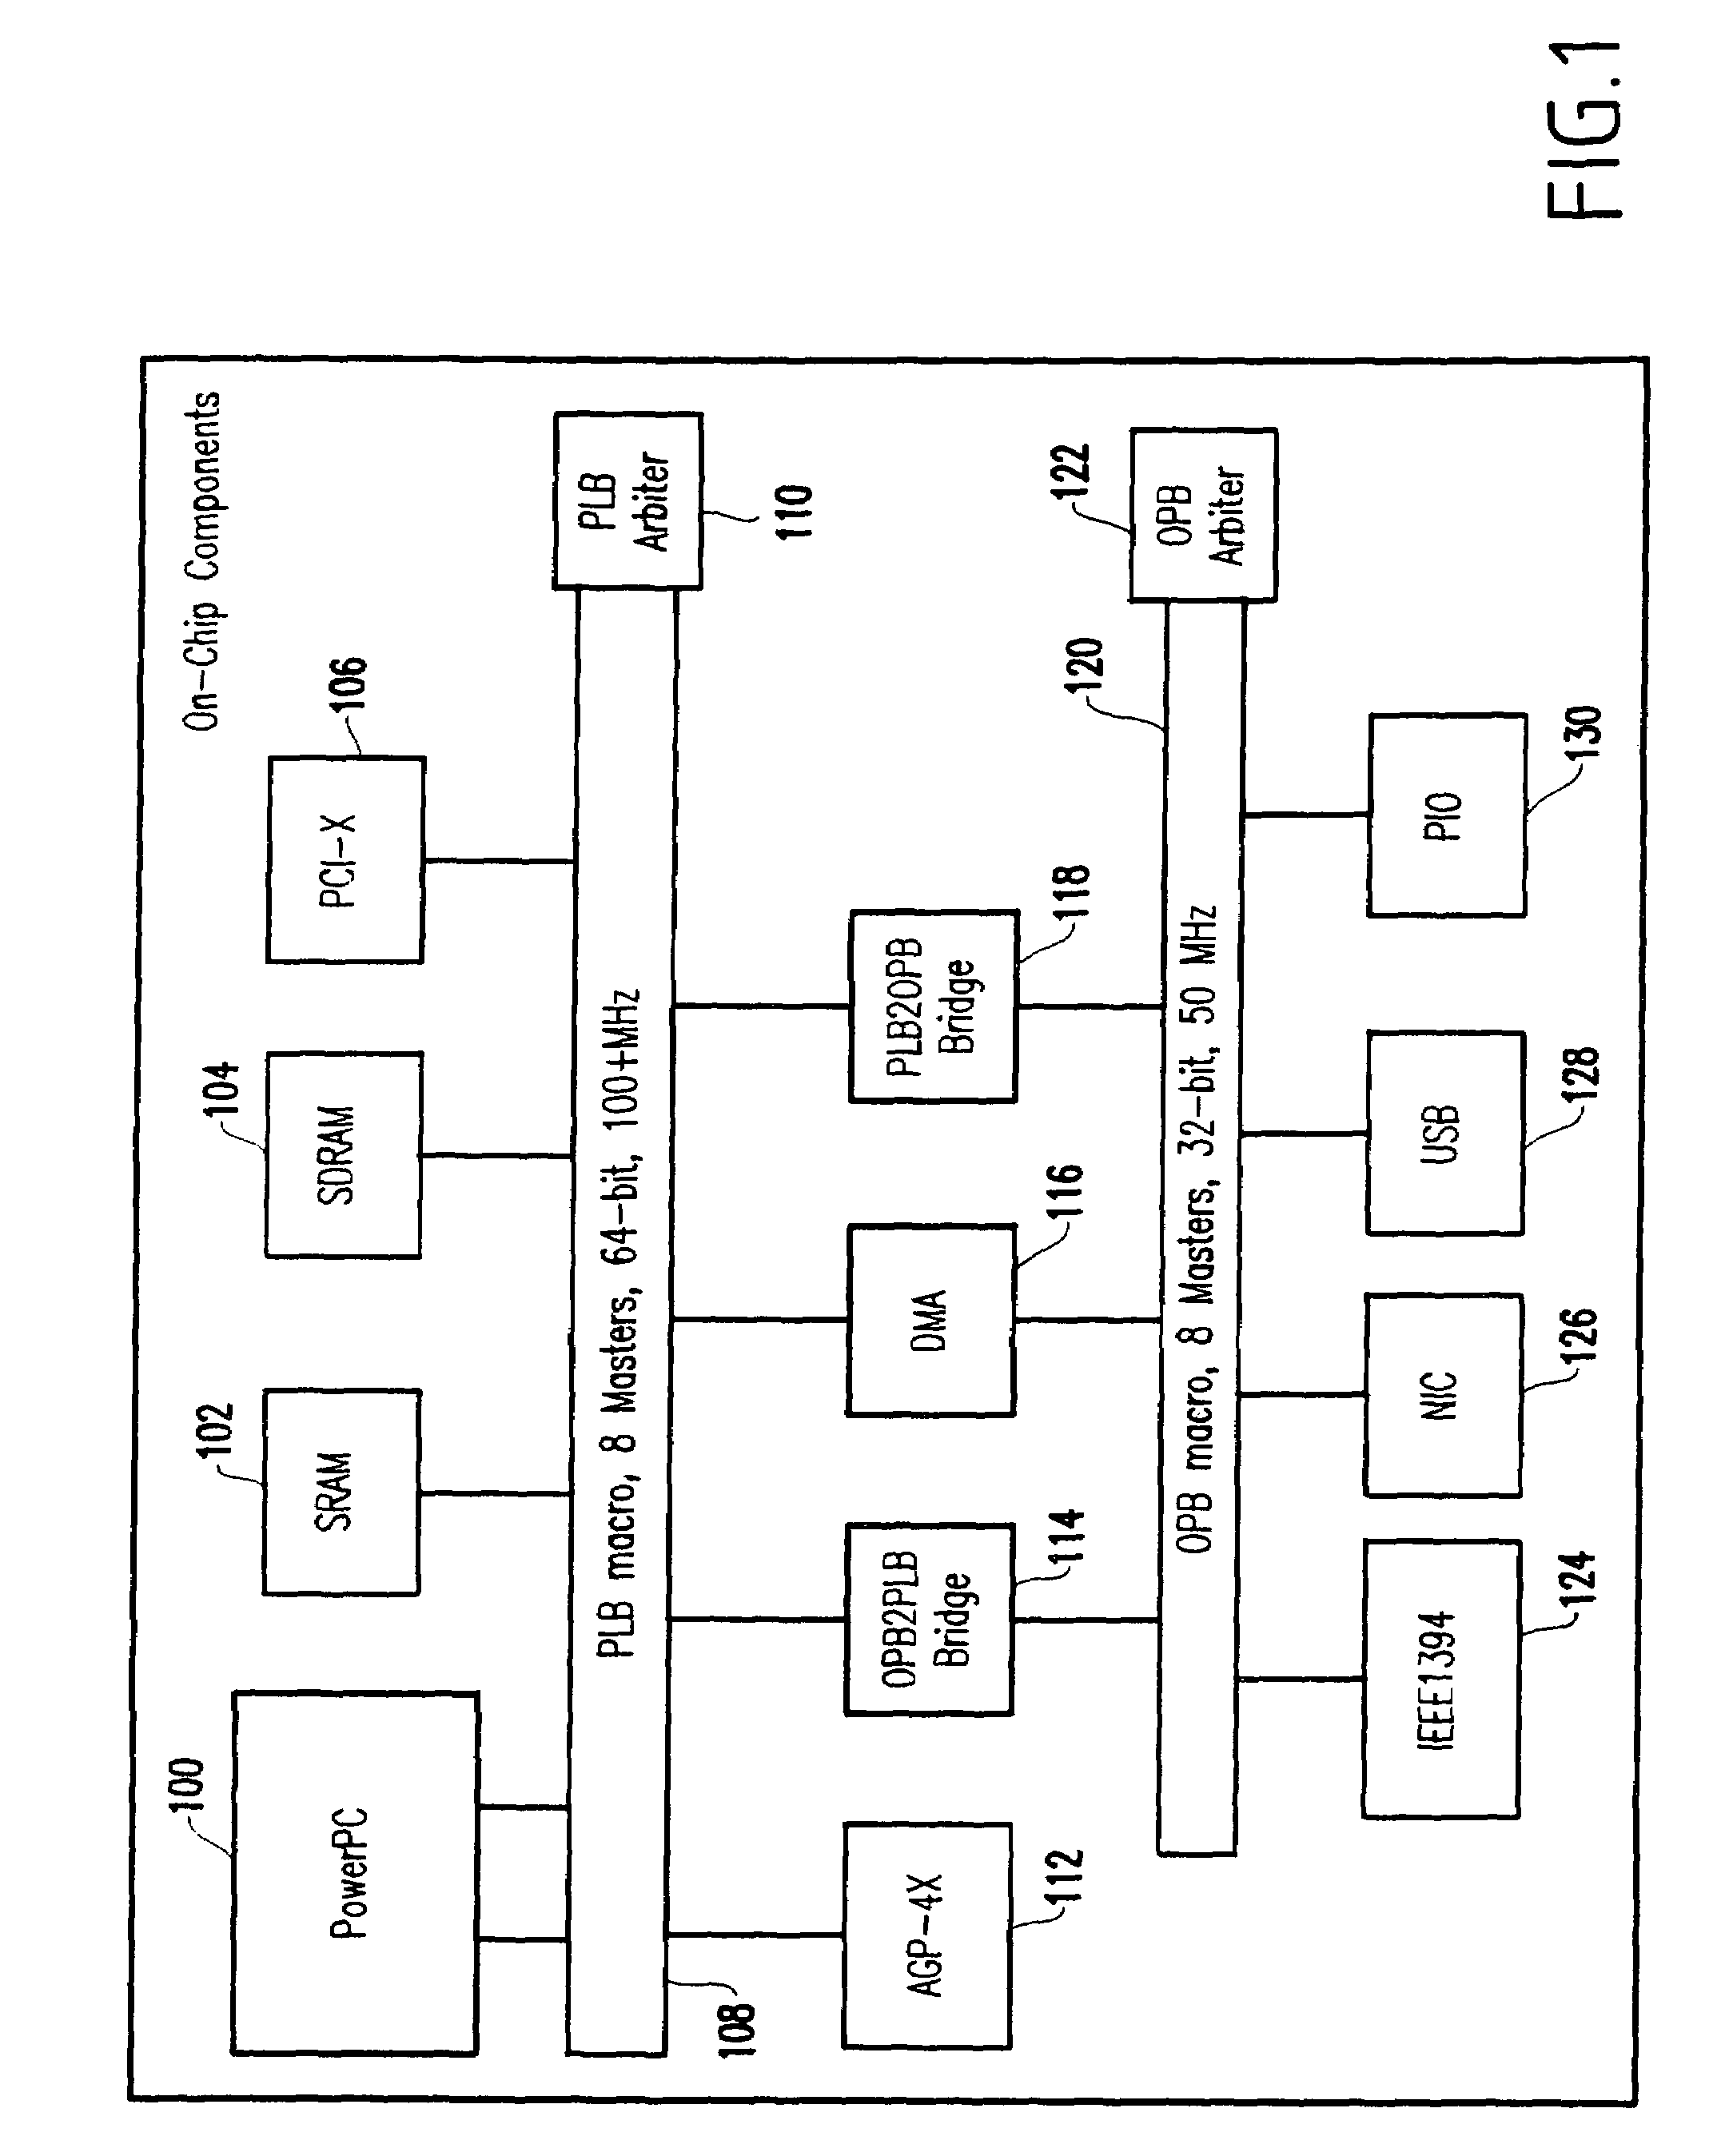 System-on-a-Chip structure having a multiple channel bus bridge